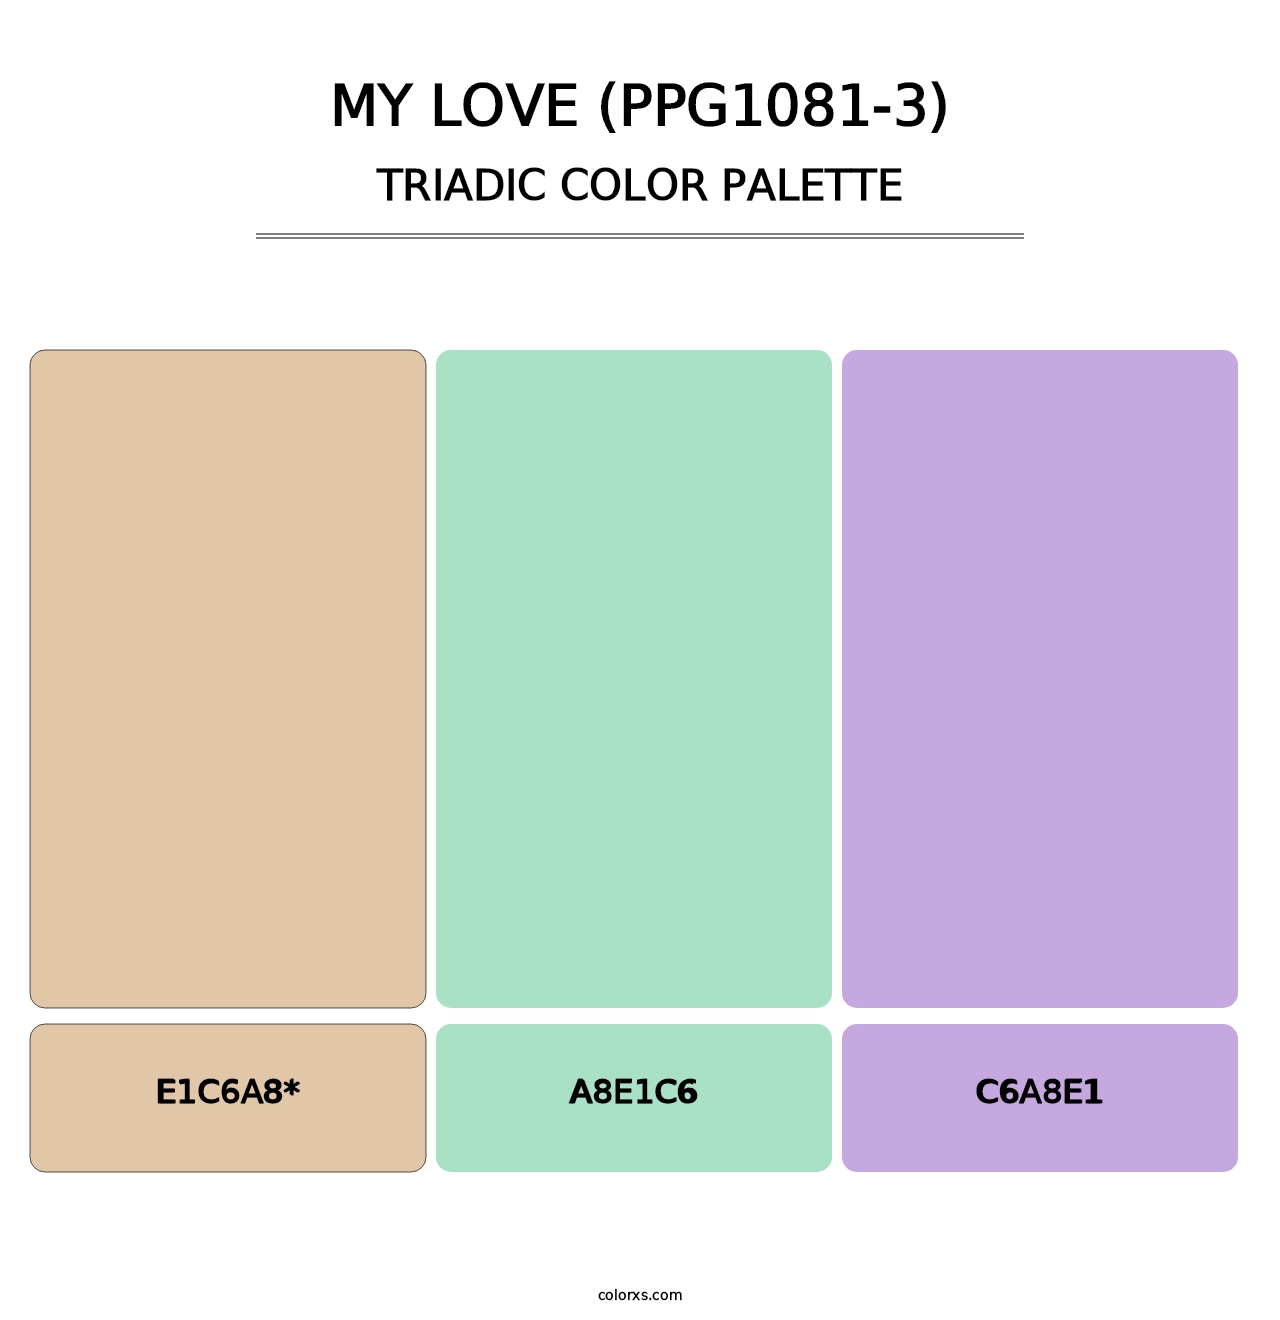 My Love (PPG1081-3) - Triadic Color Palette